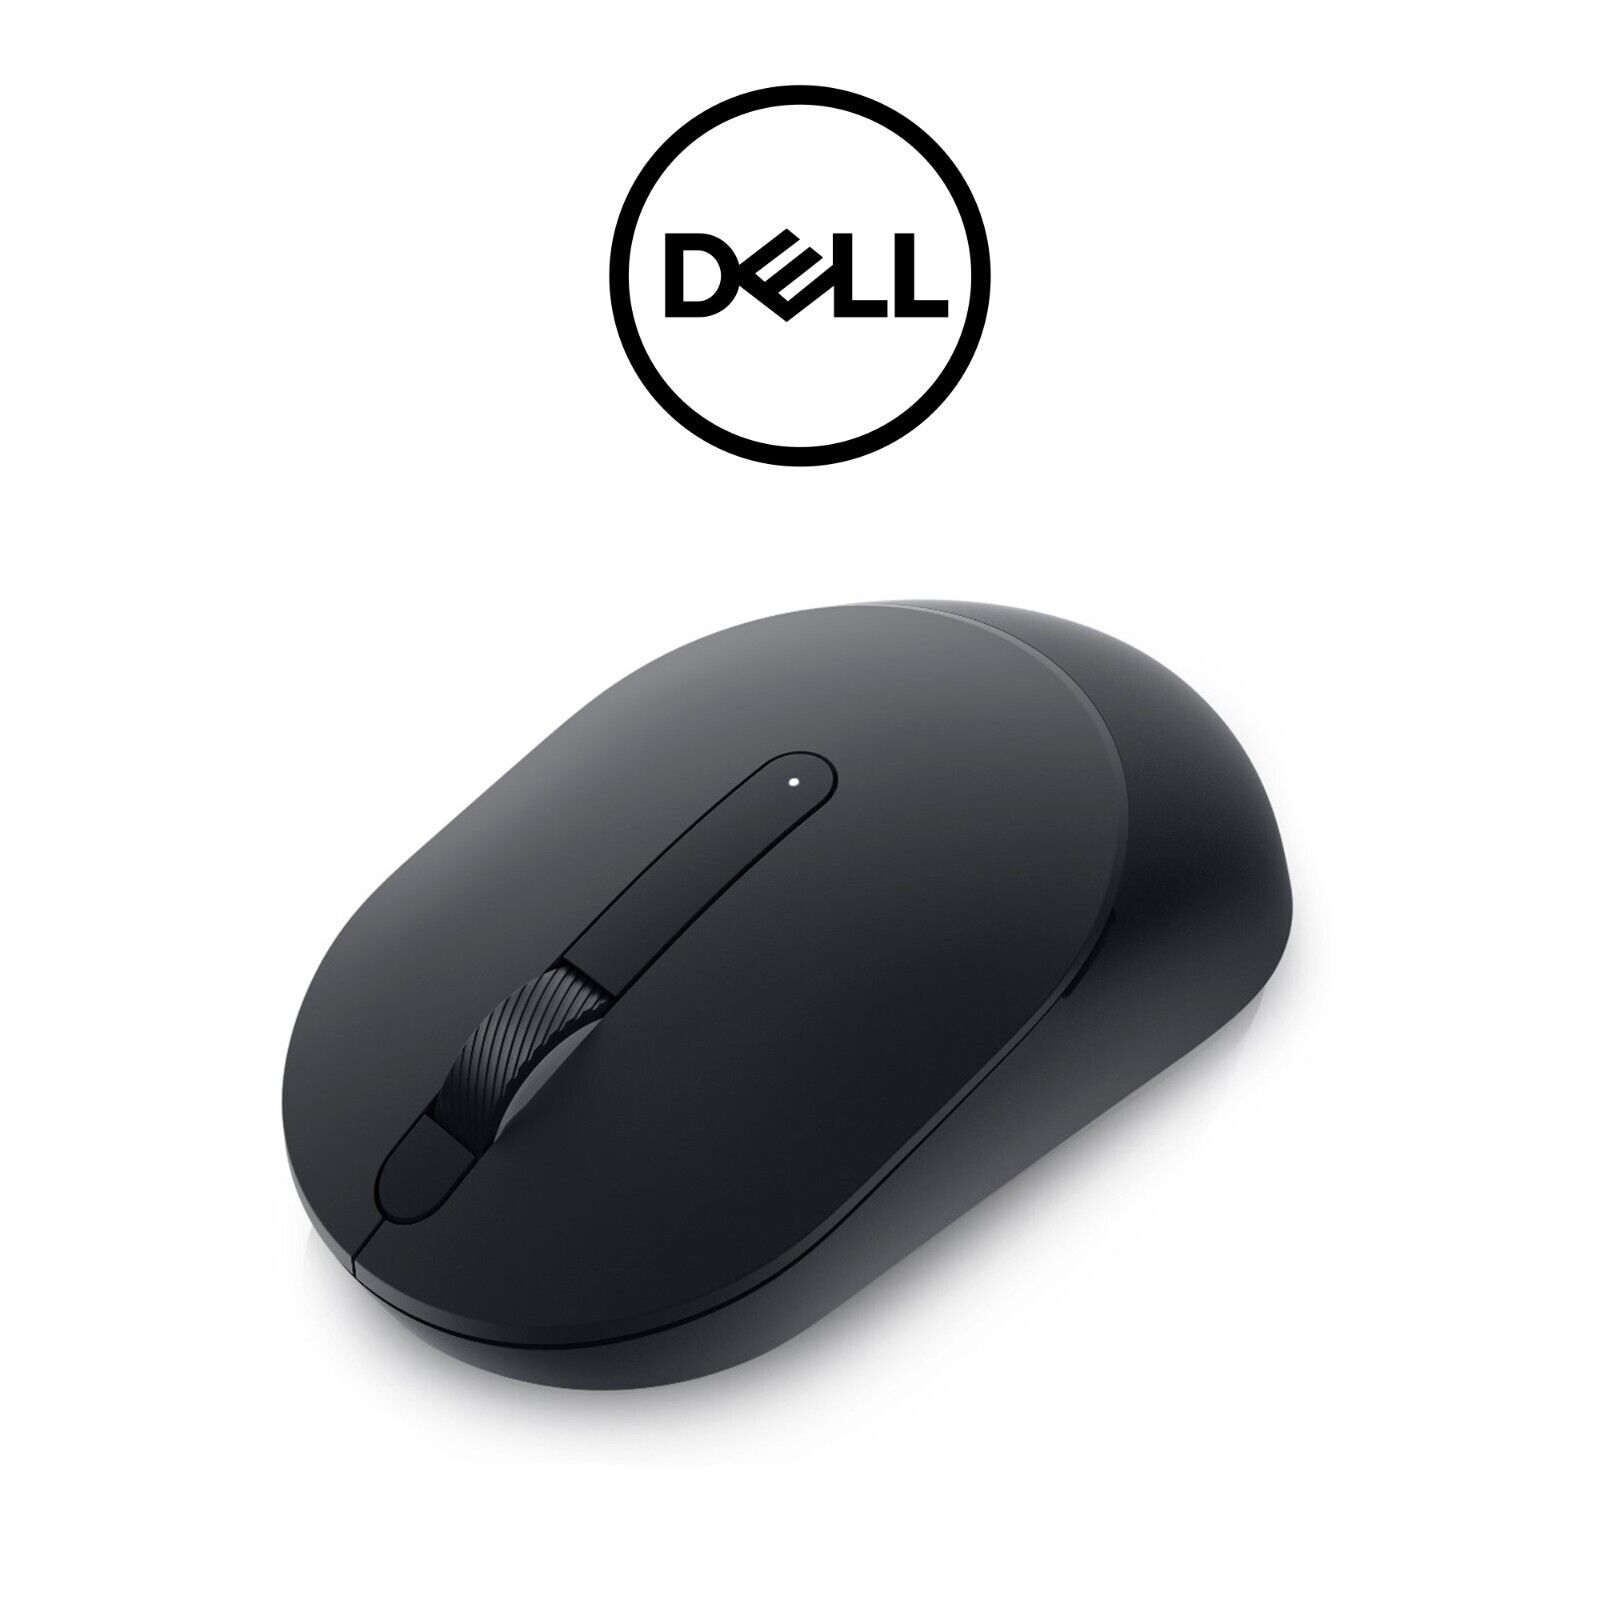 Genuine Dell MS300 Series Wireless Mouse for Desktop Laptop PC up to 4000 DPI